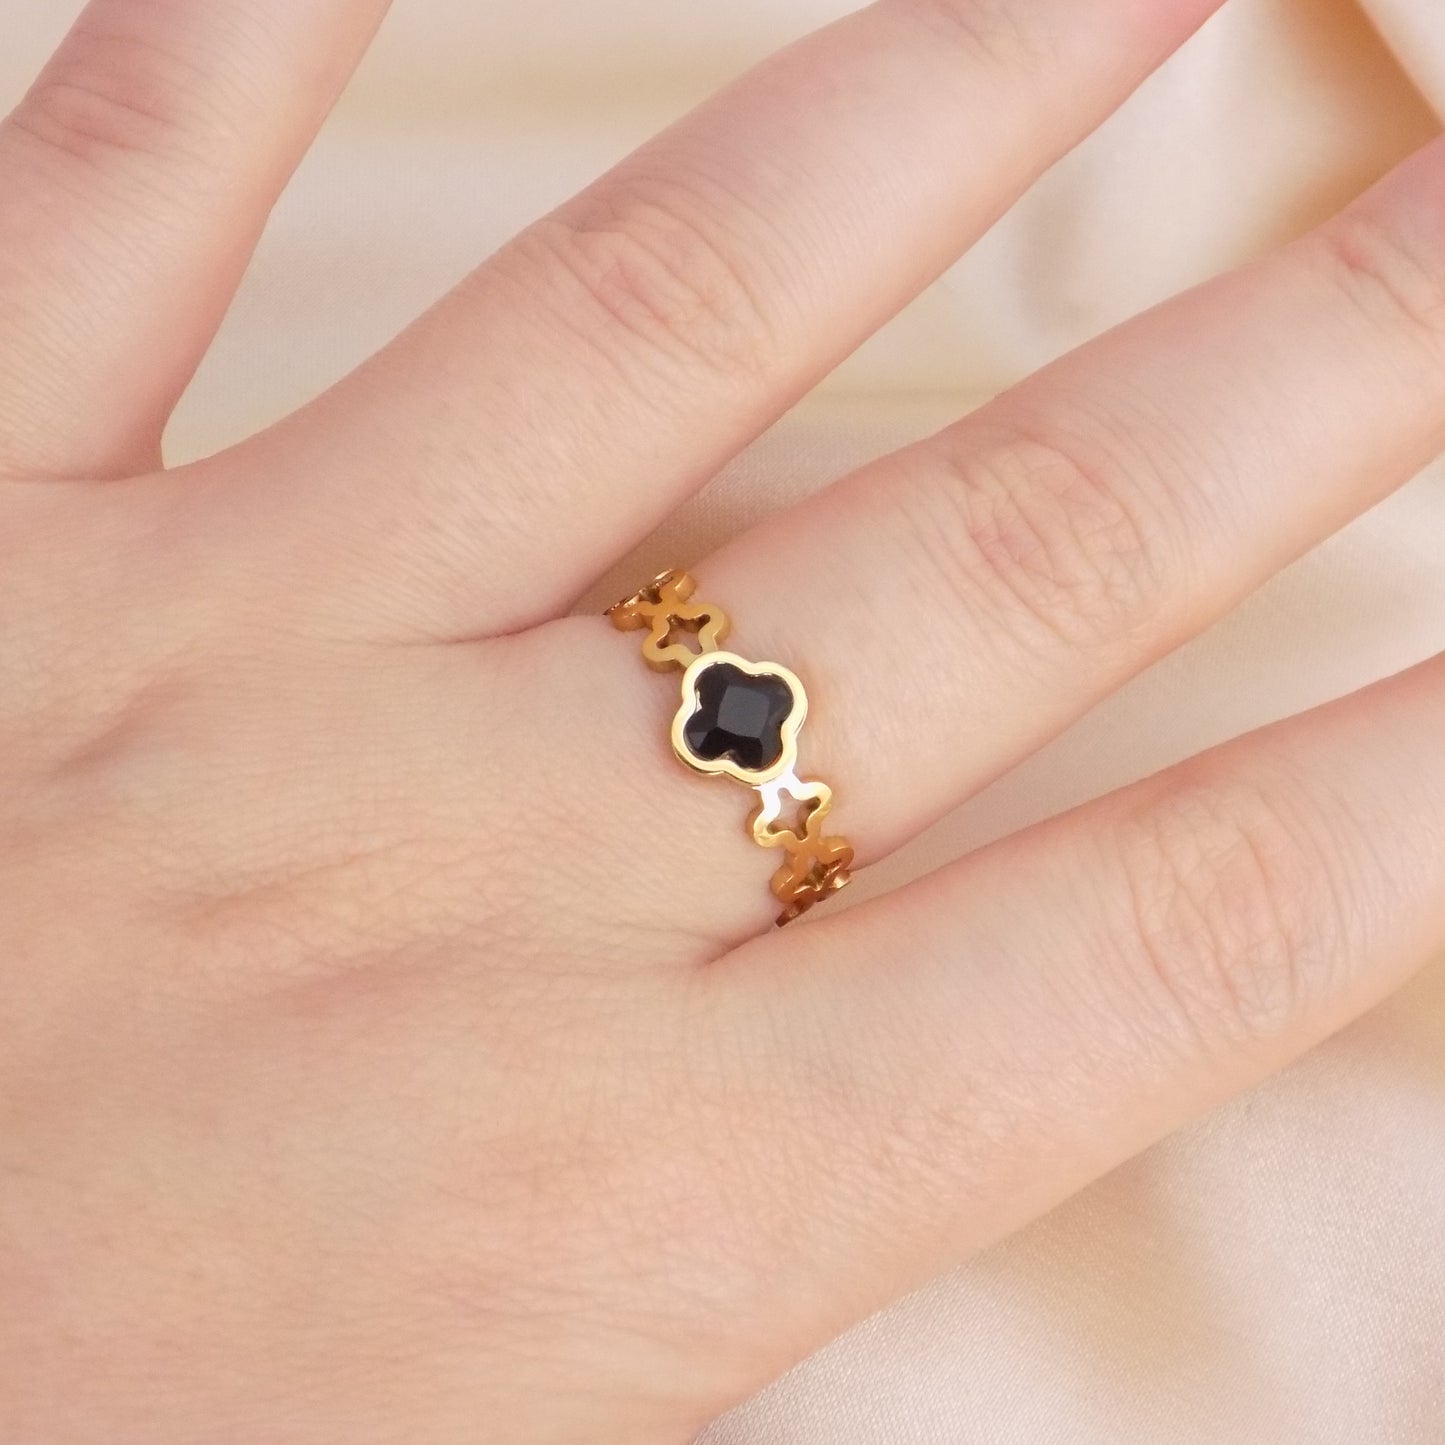 Black Clover Ring 18K Gold Stainless Steel Adjustable Minimalist Jewelry